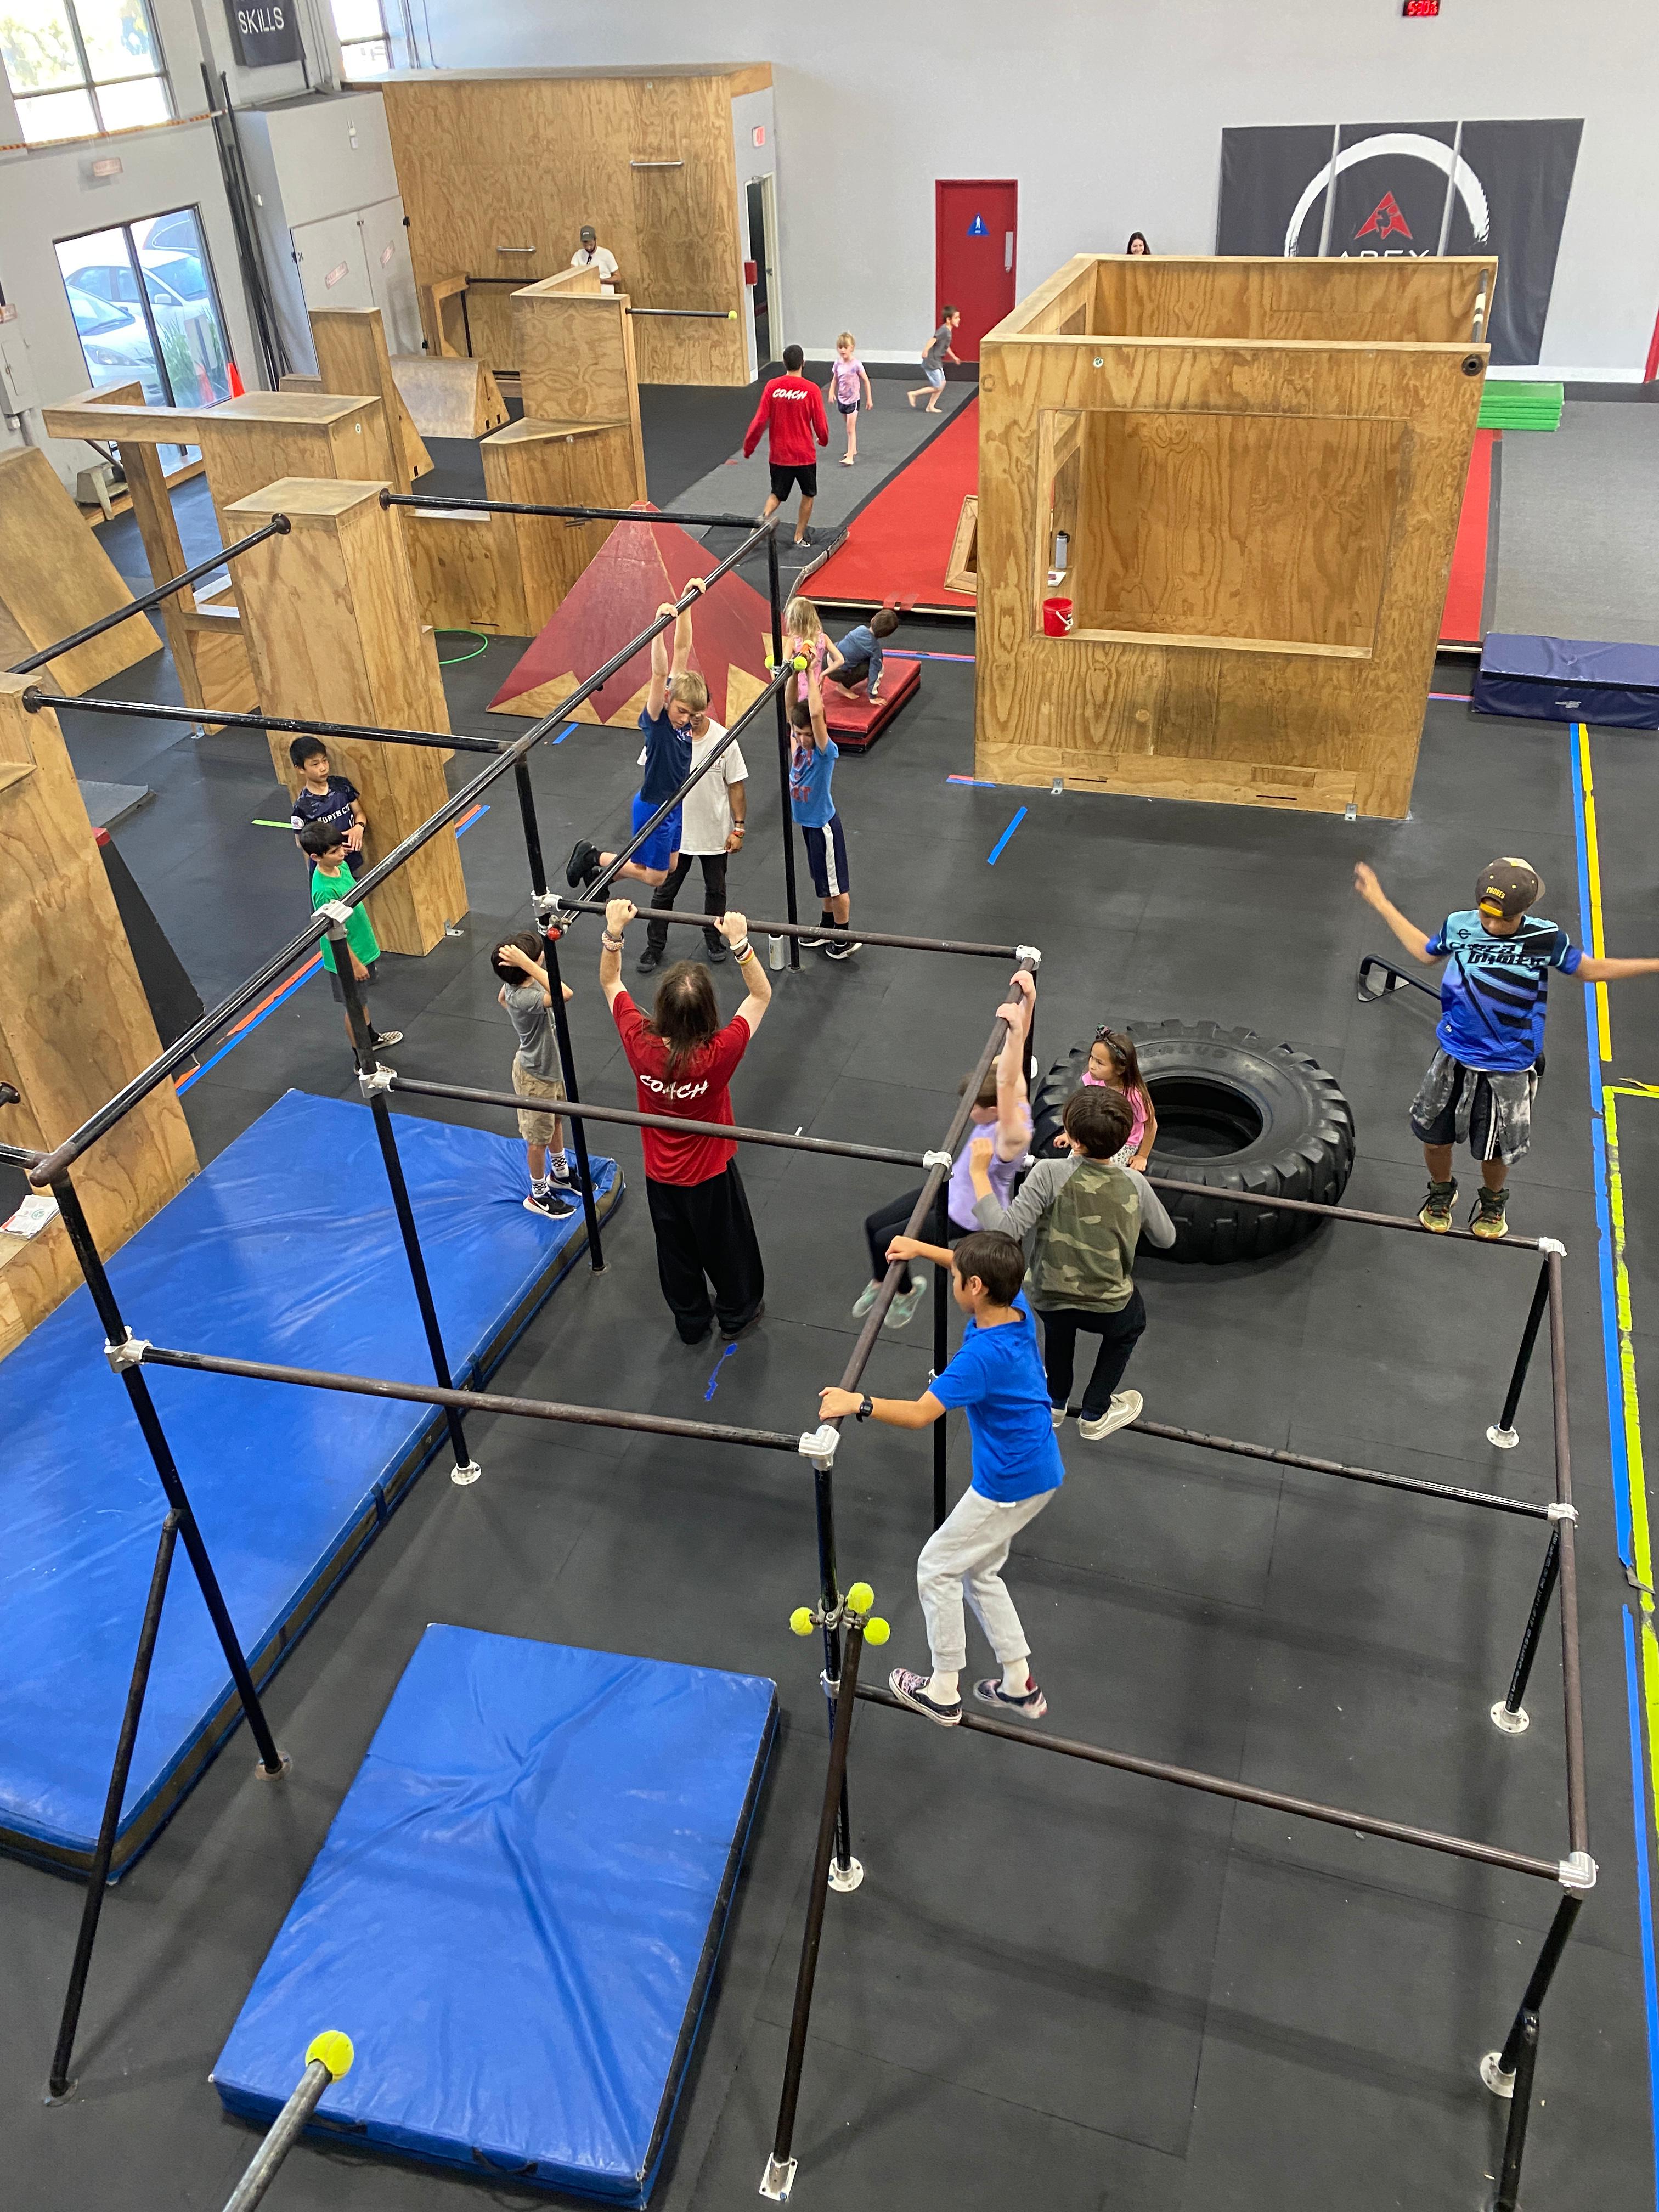 Today's skills involve the bars in the Youth Level 1 Parkour Class. APEX School of Movement San Diego San Diego (858)987-2355